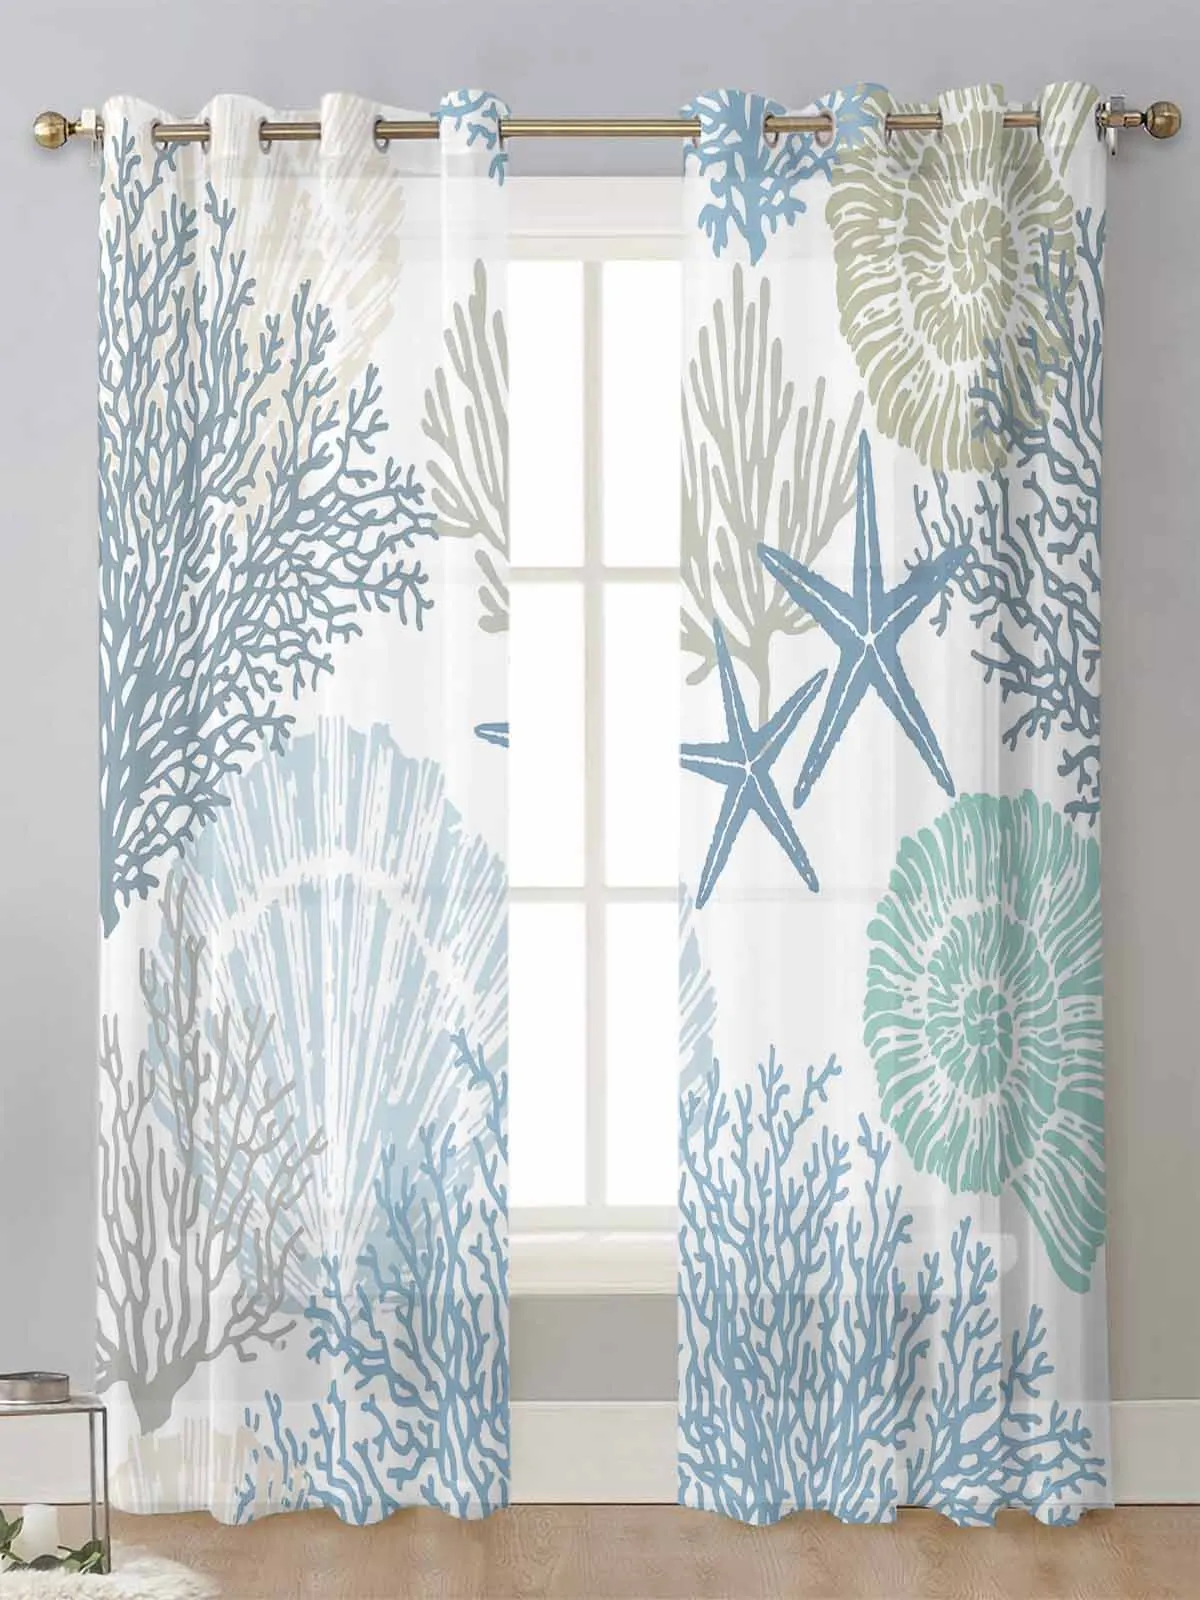 

Blue Marine Coral Shells Starfish Sheer Curtains For Living Room Window Voile Tulle Curtain Cortinas Drapes Home Decor